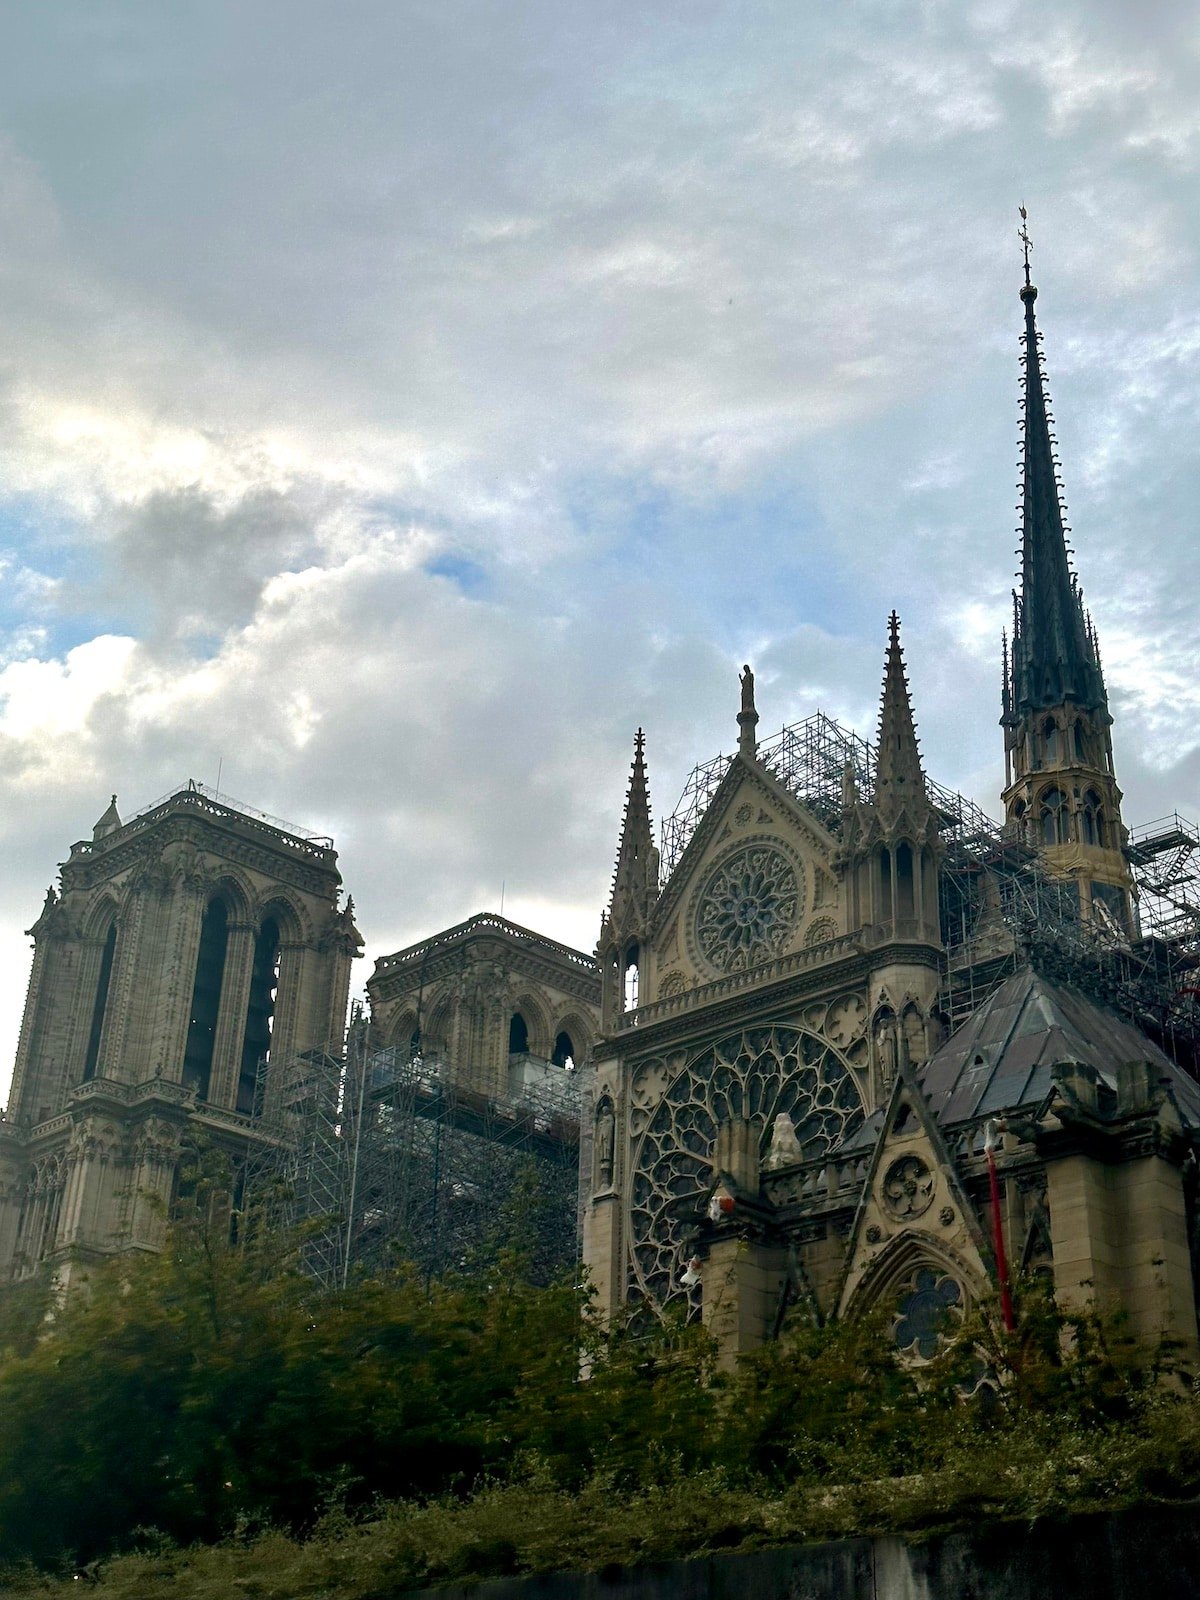 Gothic cathedral with scaffolding, featuring a tall spire, intricate facade, and two towers, under a partly cloudy sky—one day in Paris you won't forget.